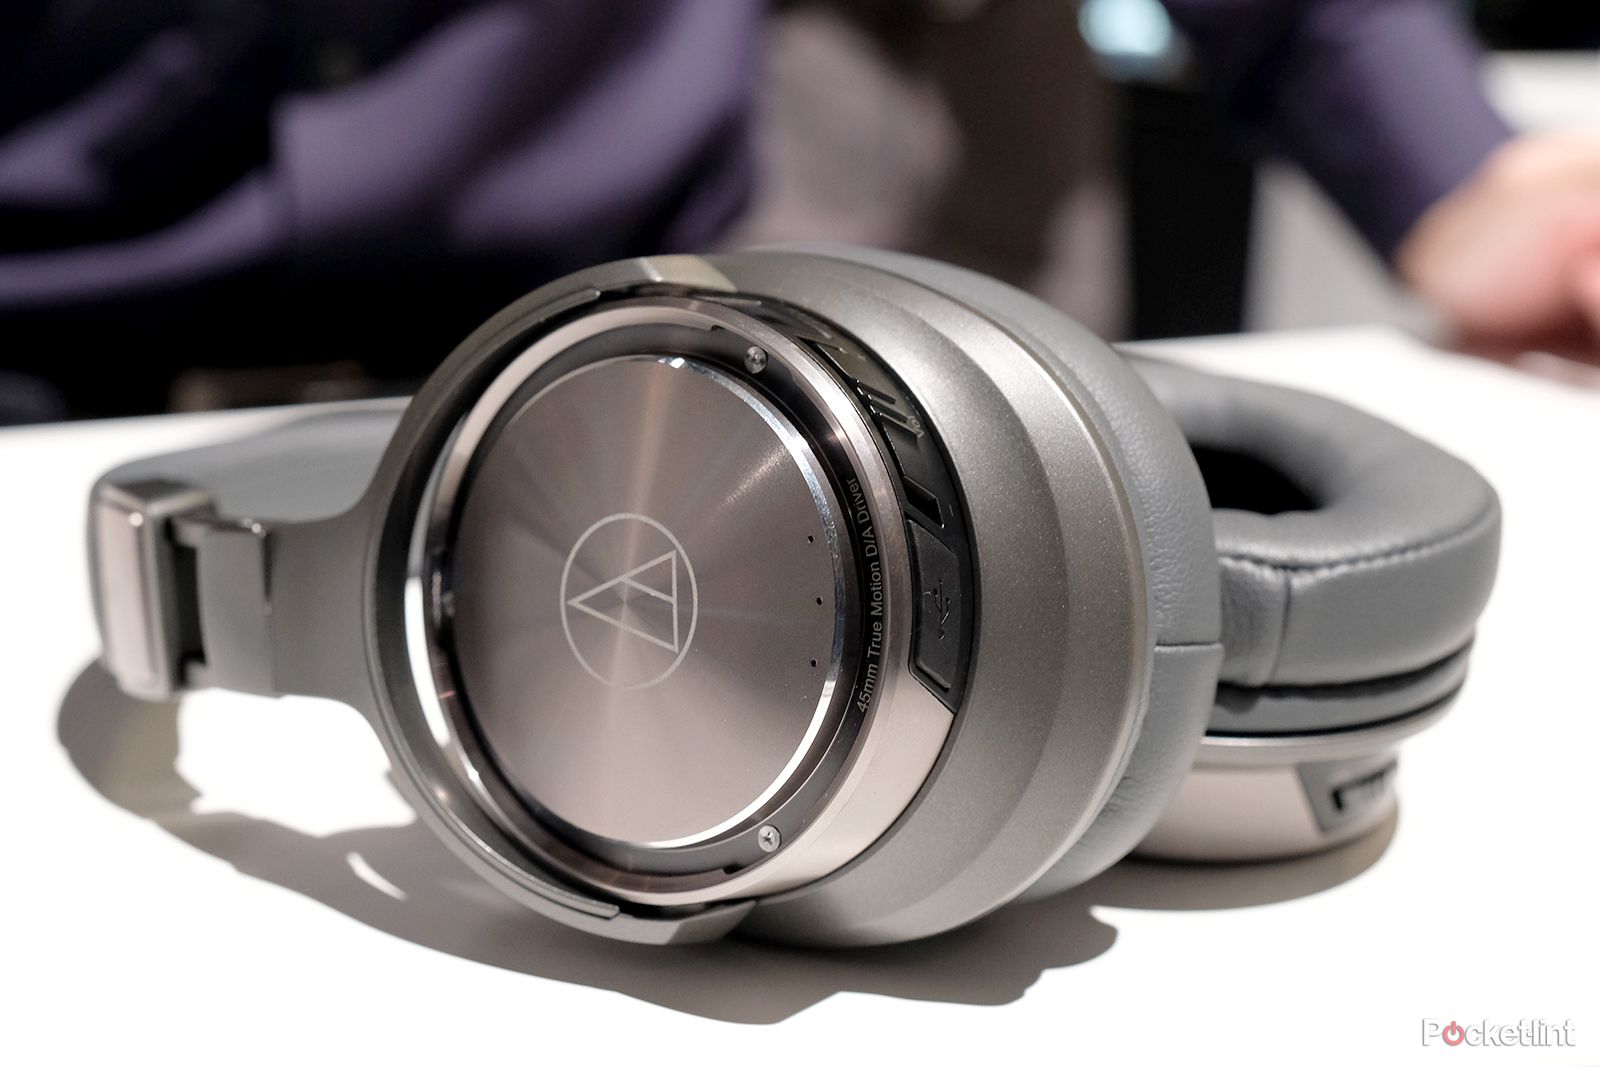 audio technica ath dsr9bt preview image 1